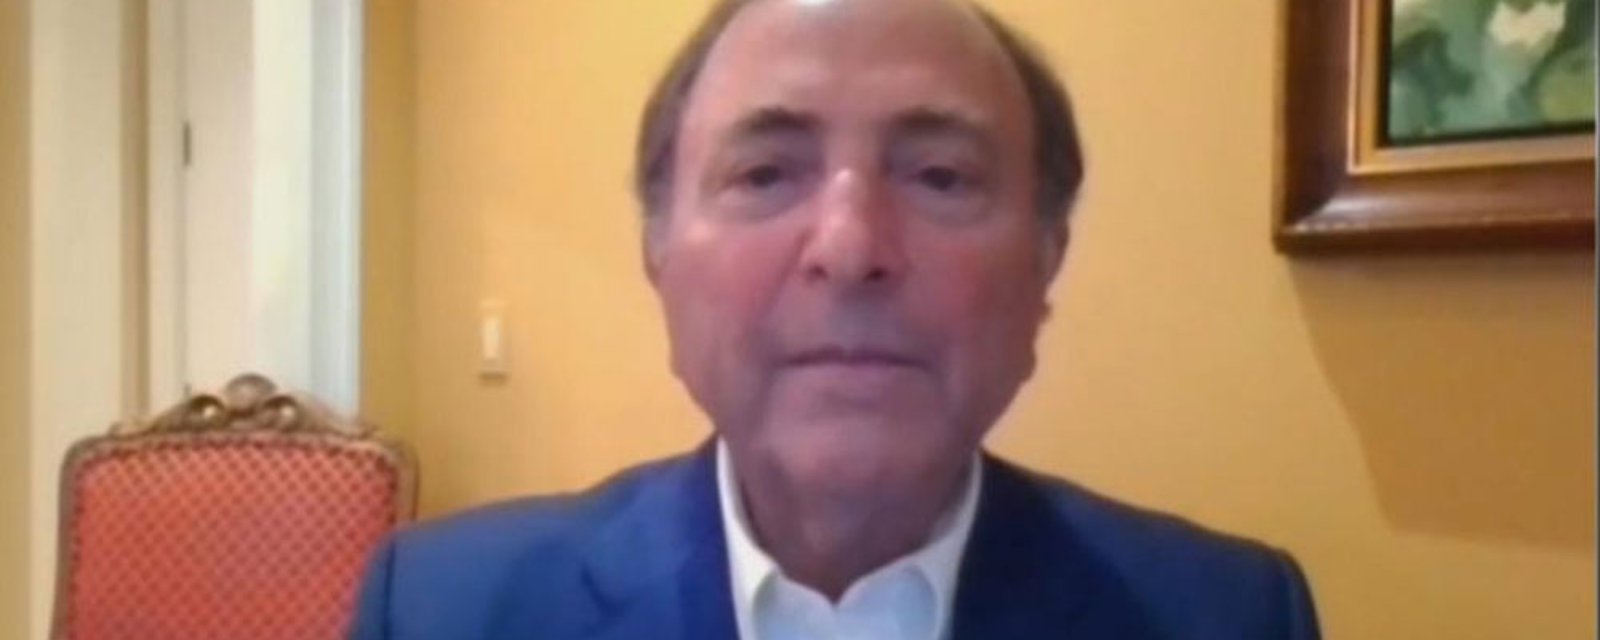 Gary Bettman’s 3-year-old grandson interrupts press conference in funniest way!